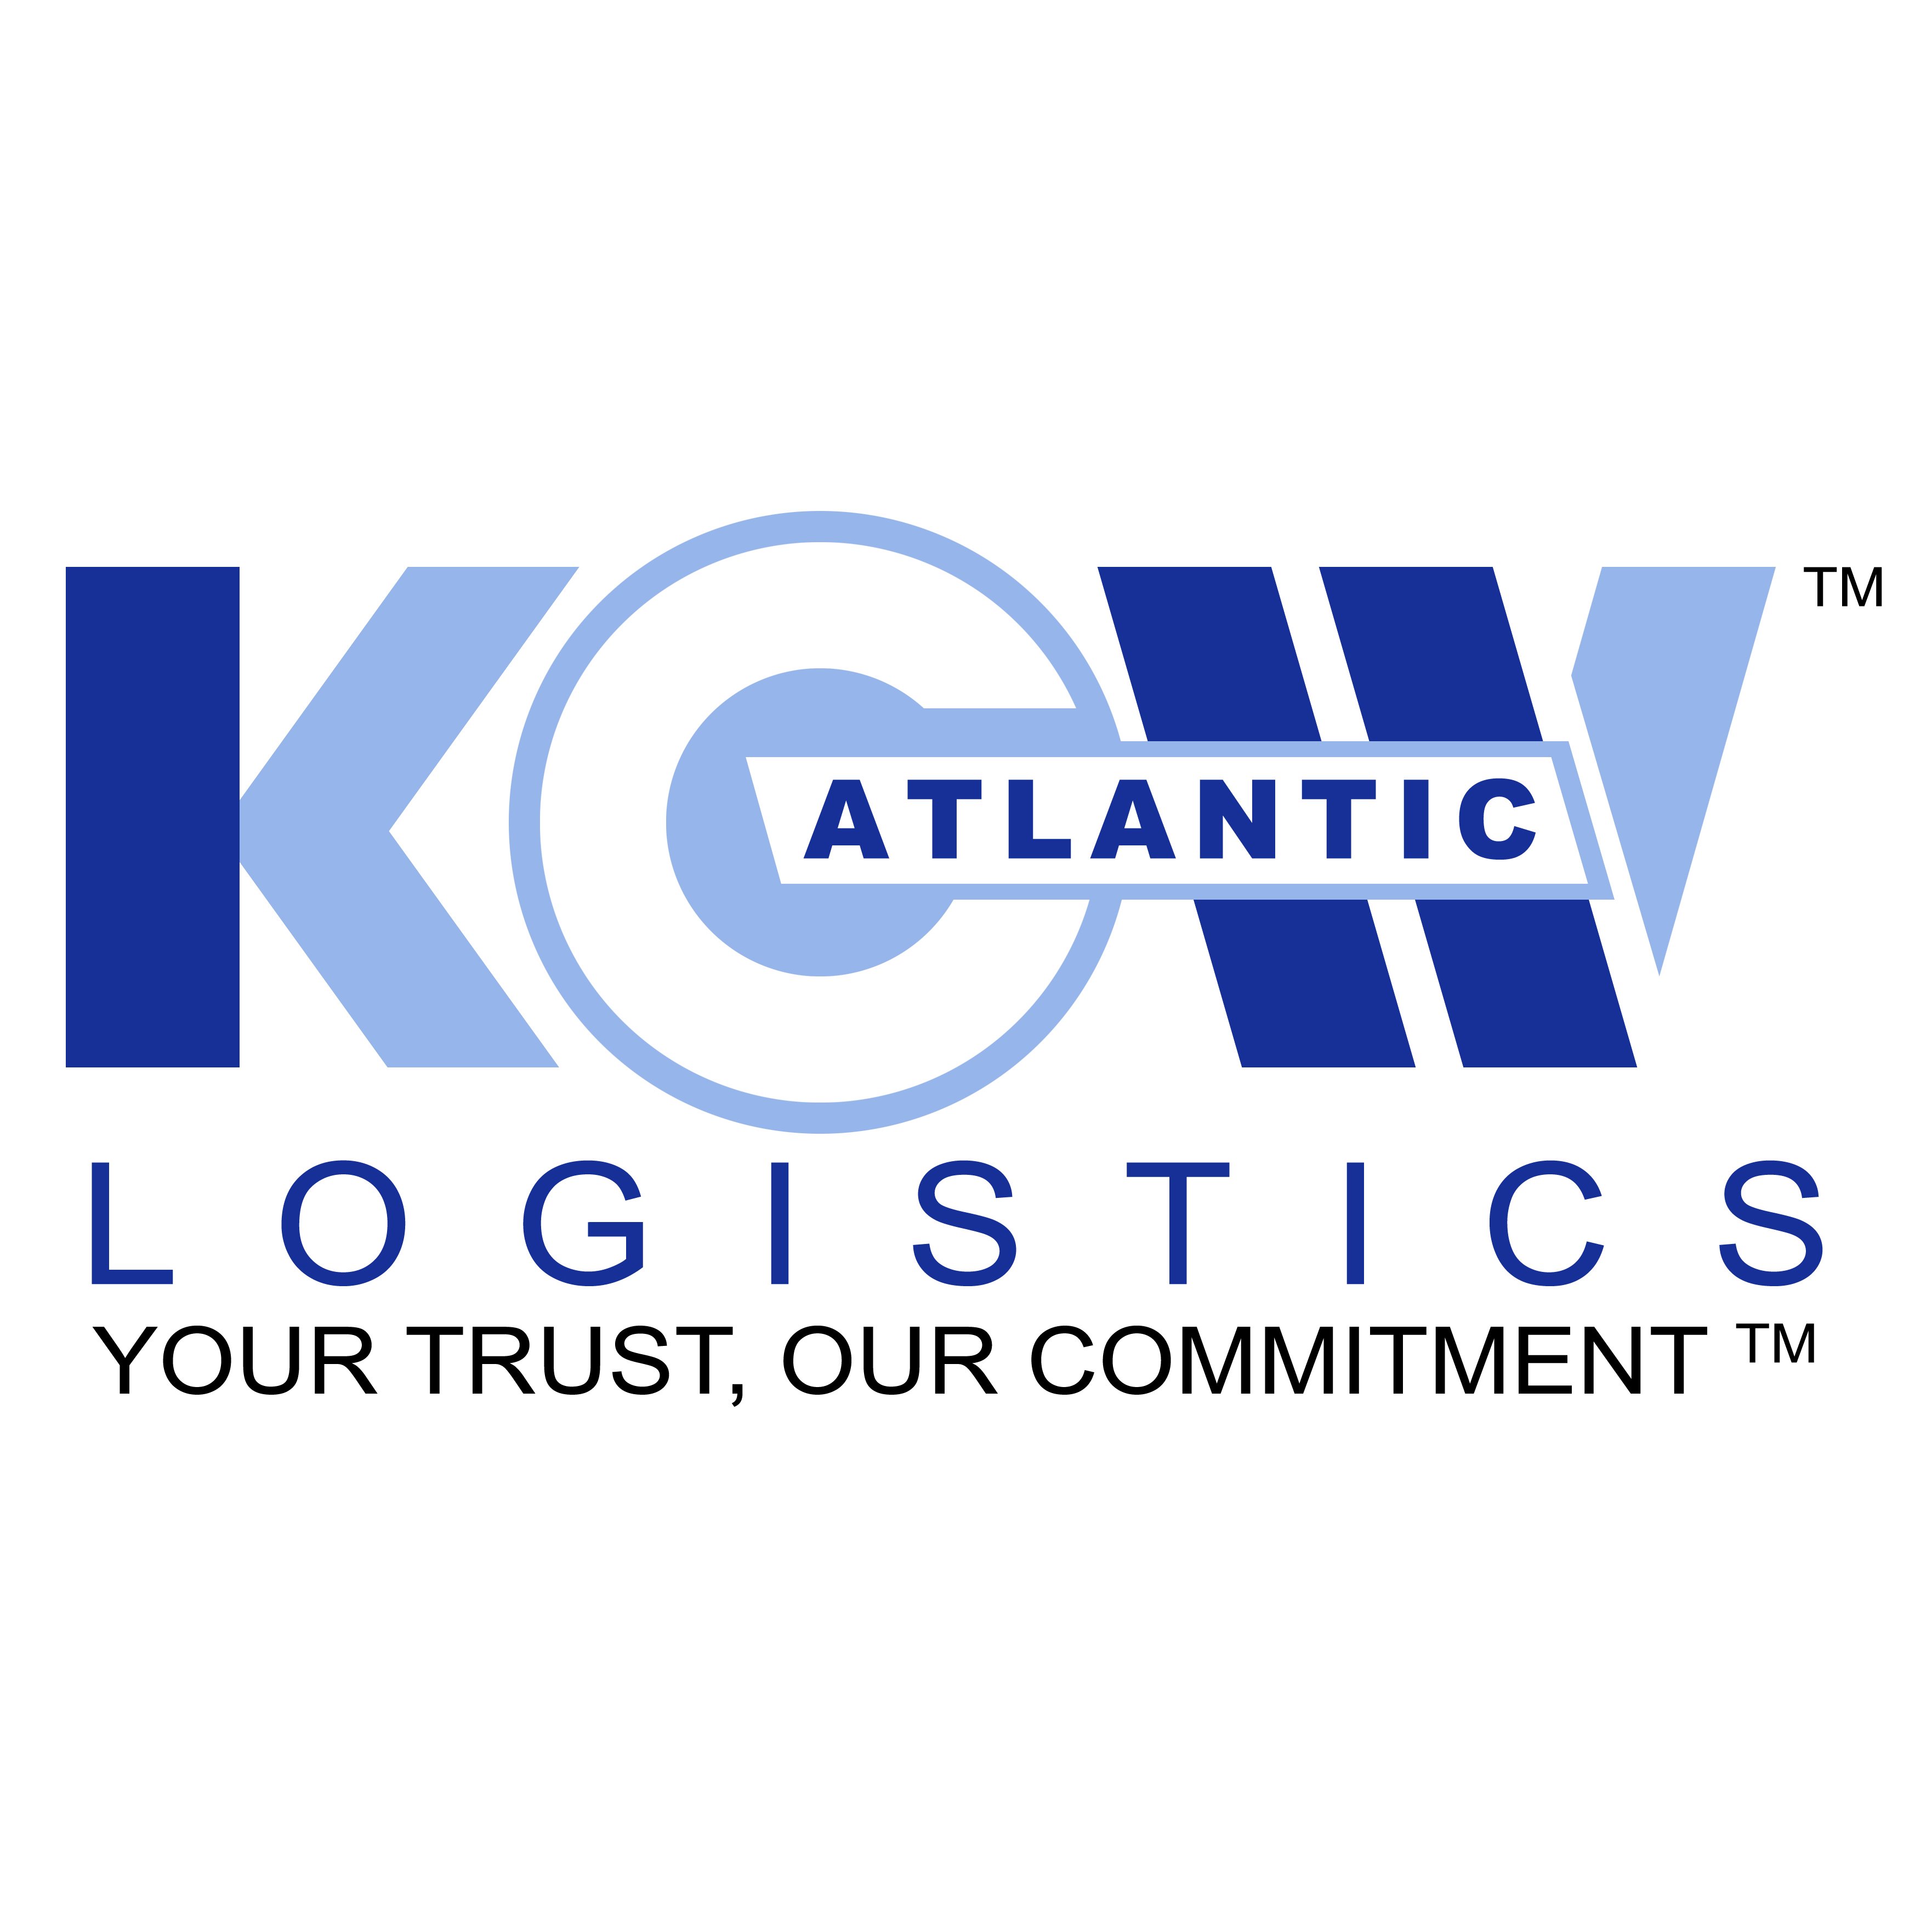 KGW ATLANTIC COMPANY LIMITTED